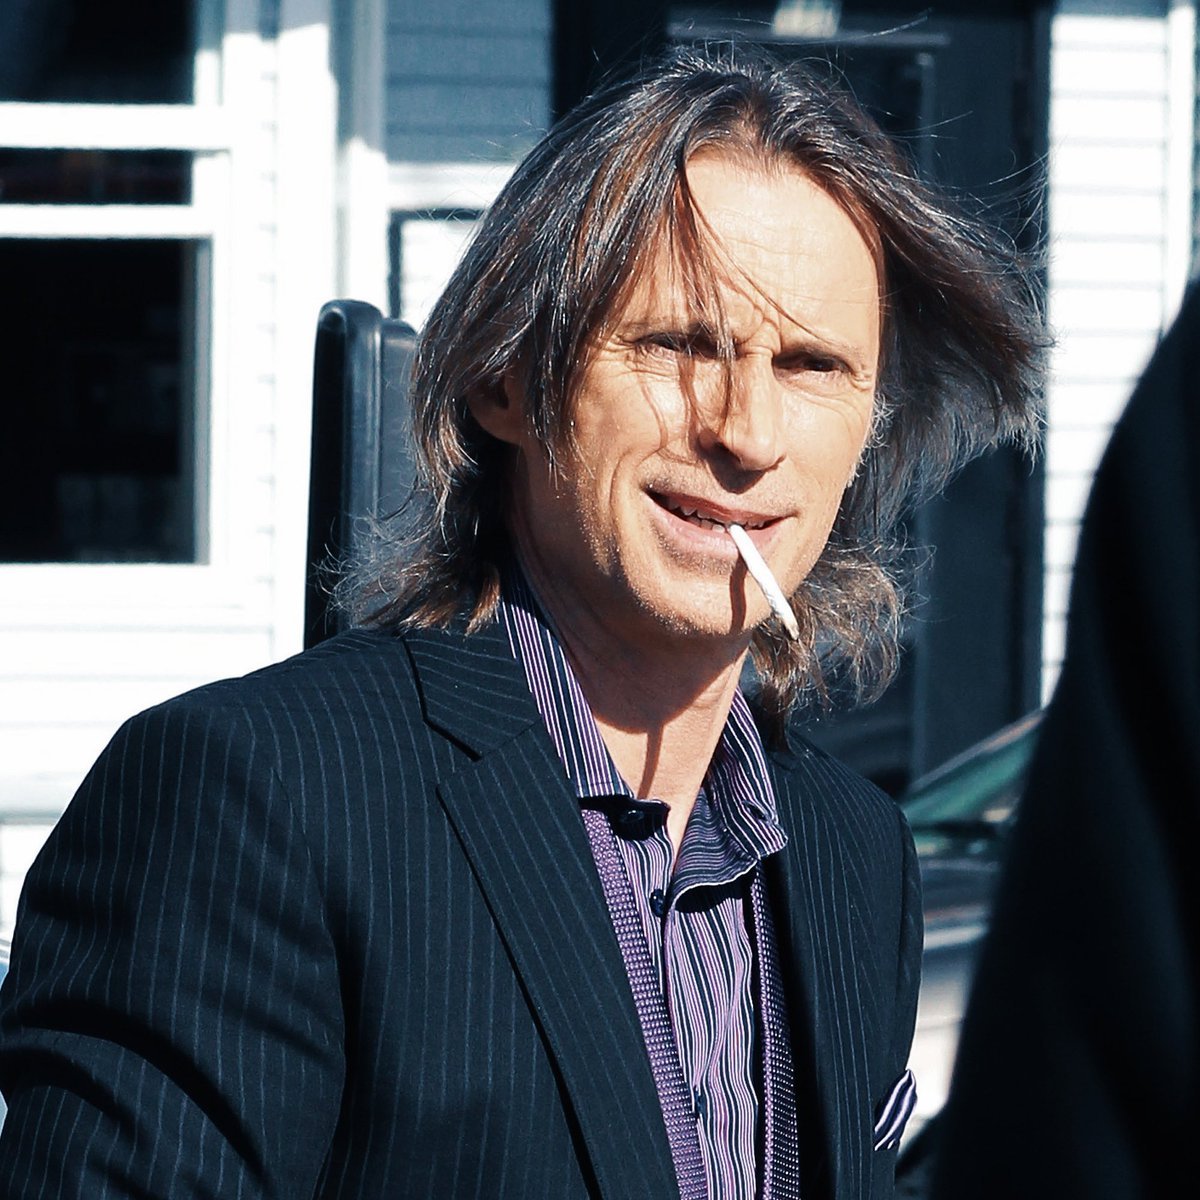 Robert Carlyle smoking a cigarette (or weed)
